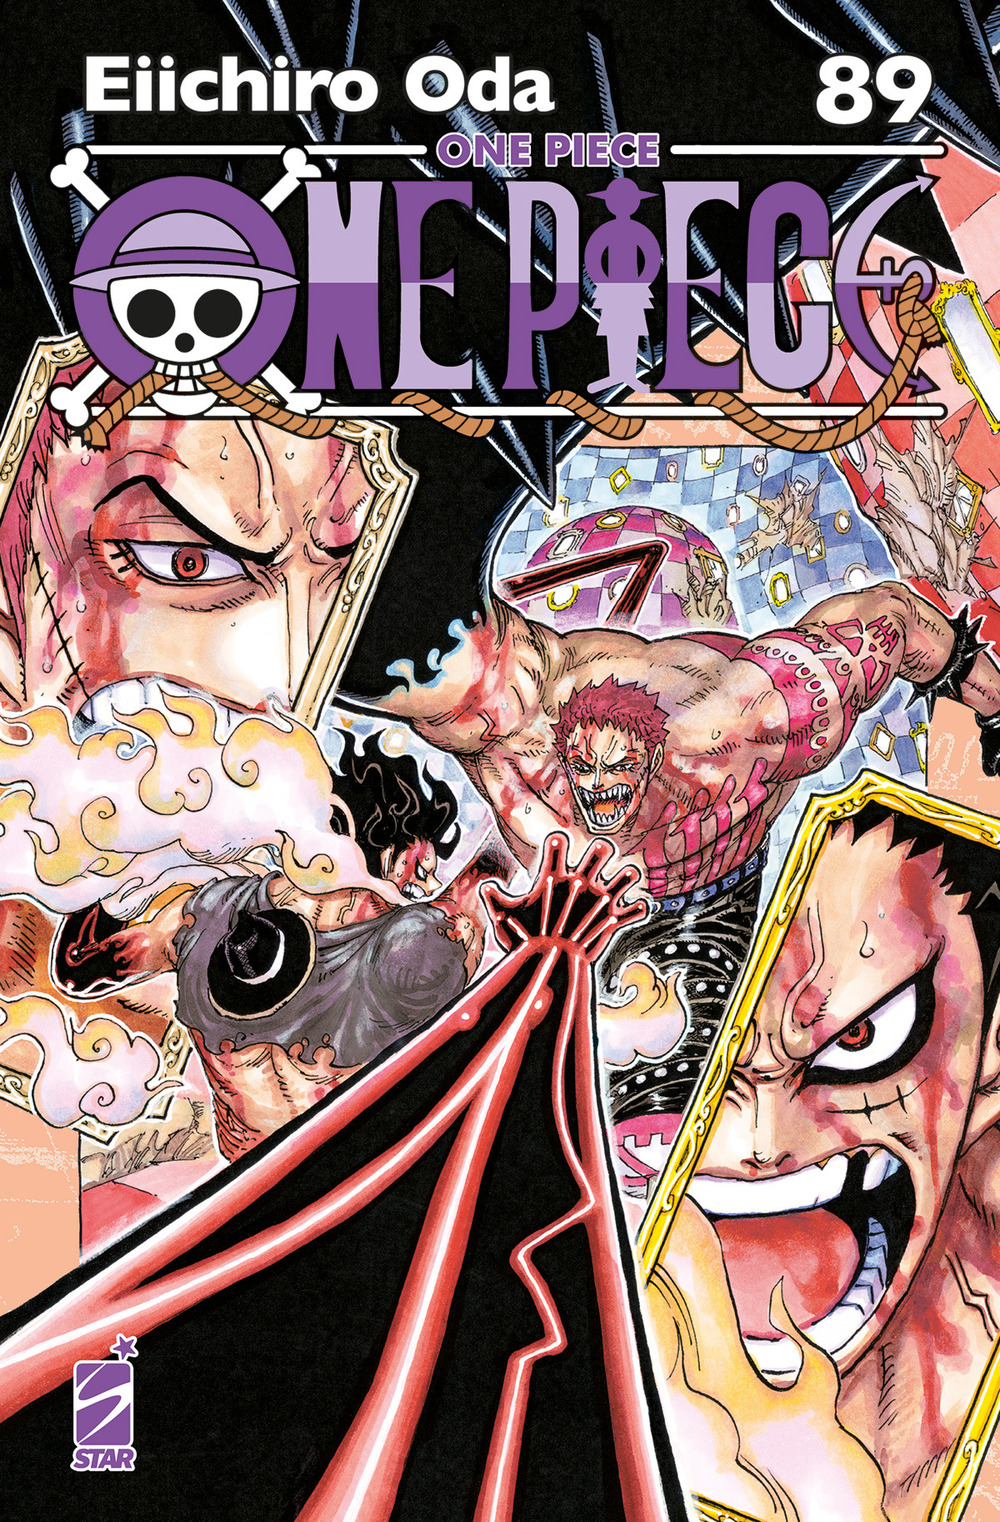 One piece. New edition. Vol. 89